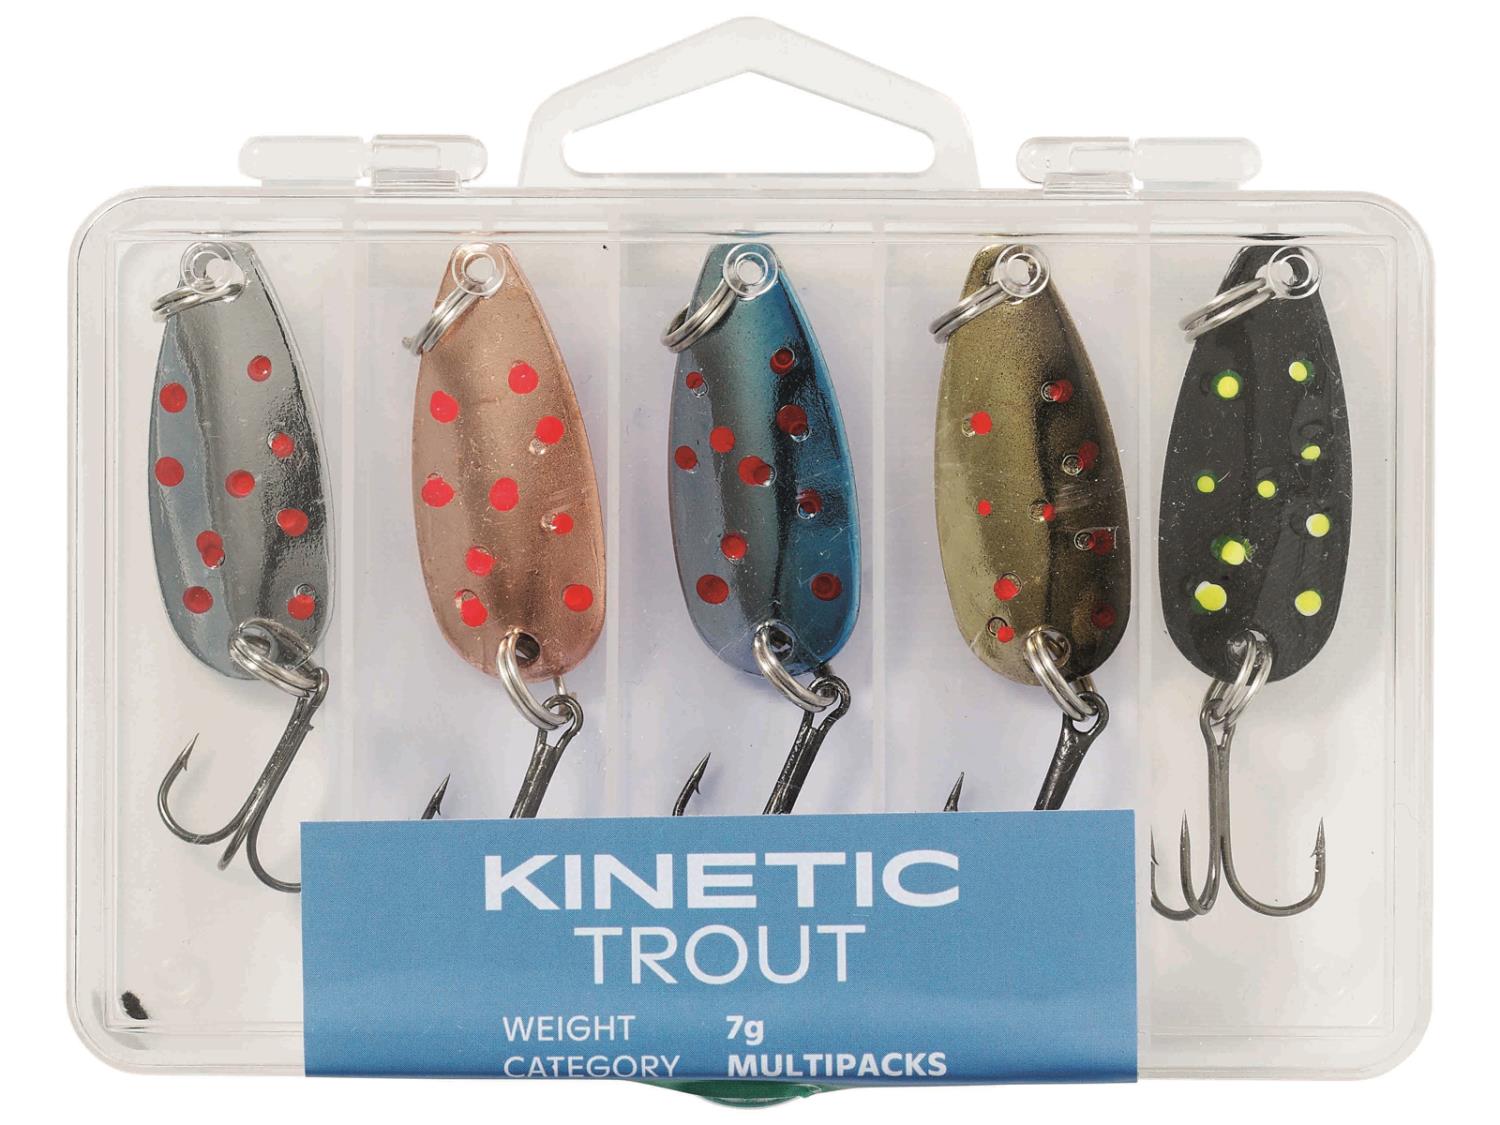 Kinetic Trout 7g